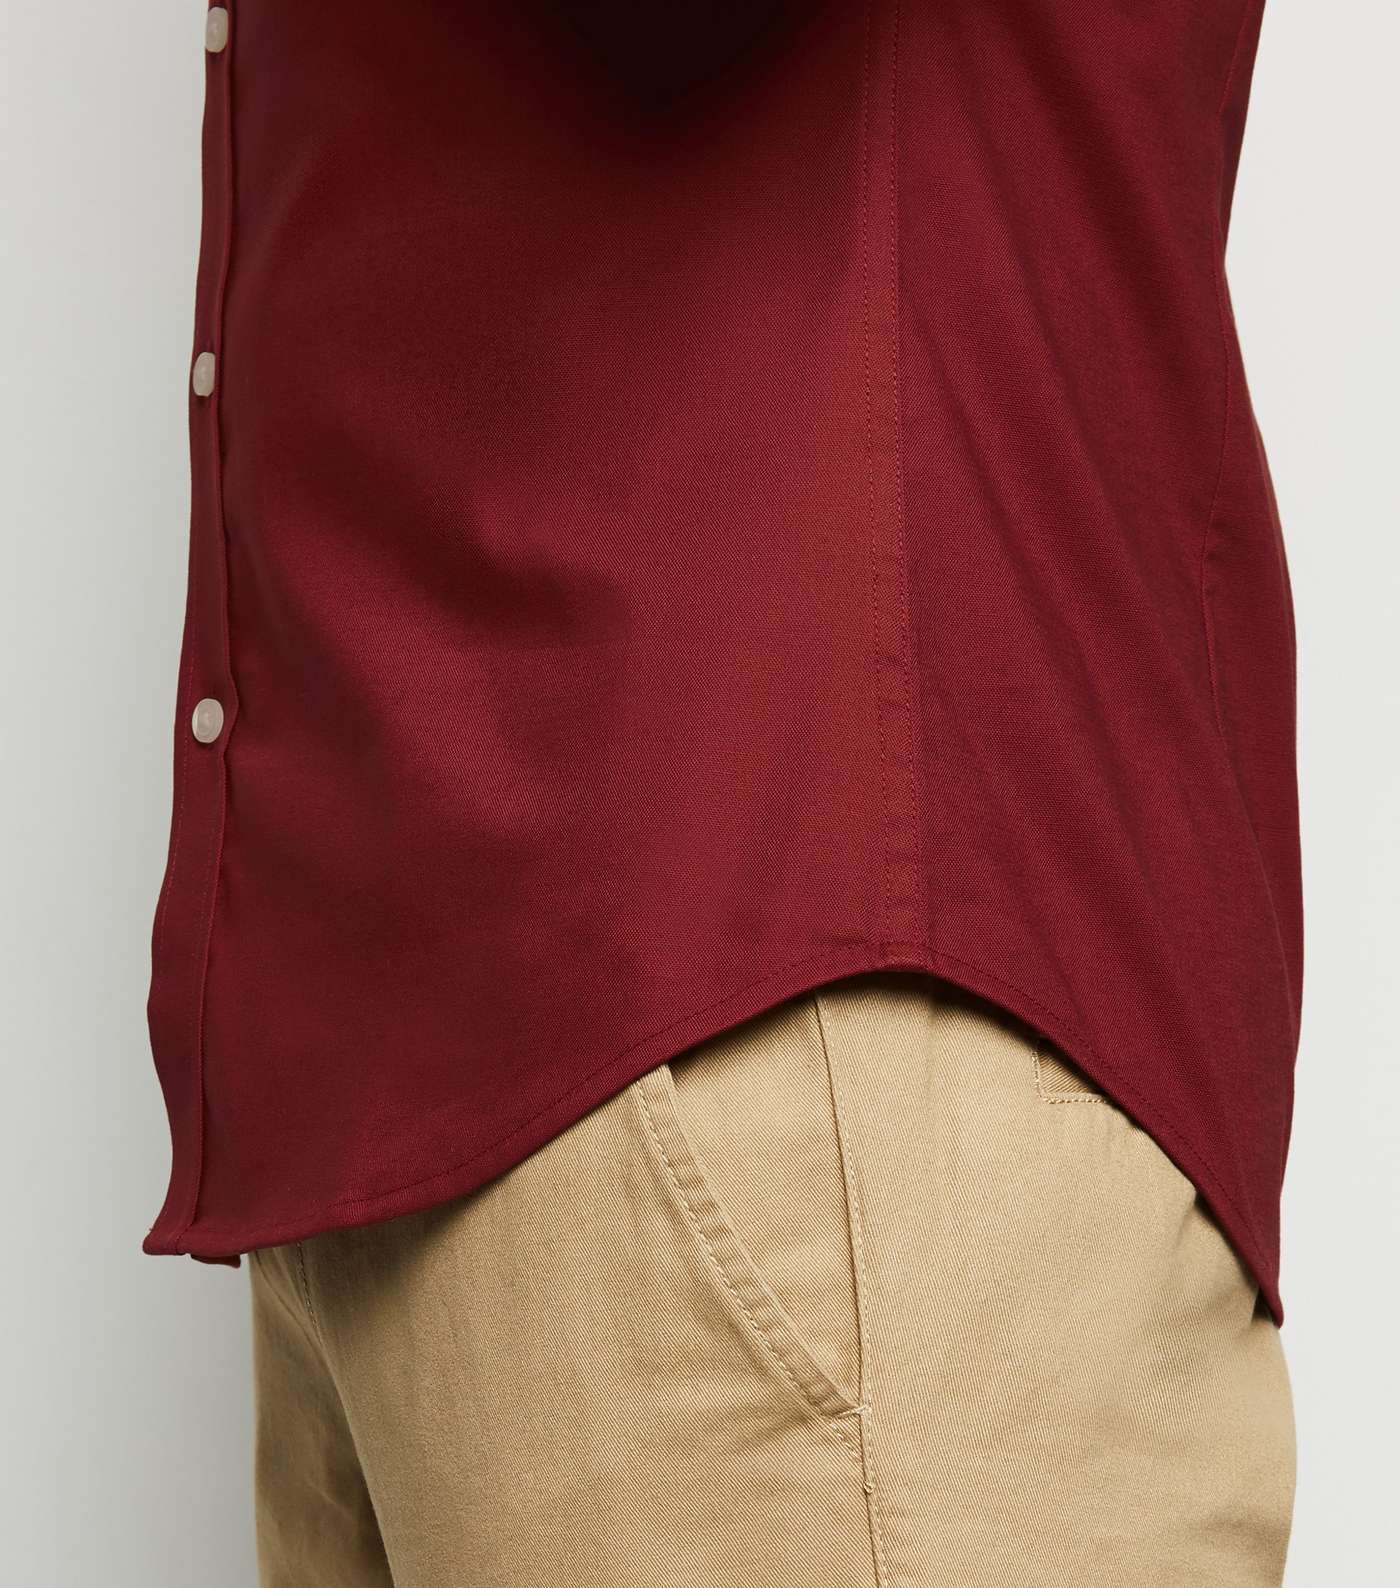 Burgundy Short Sleeve Muscle Fit Oxford Shirt Image 5